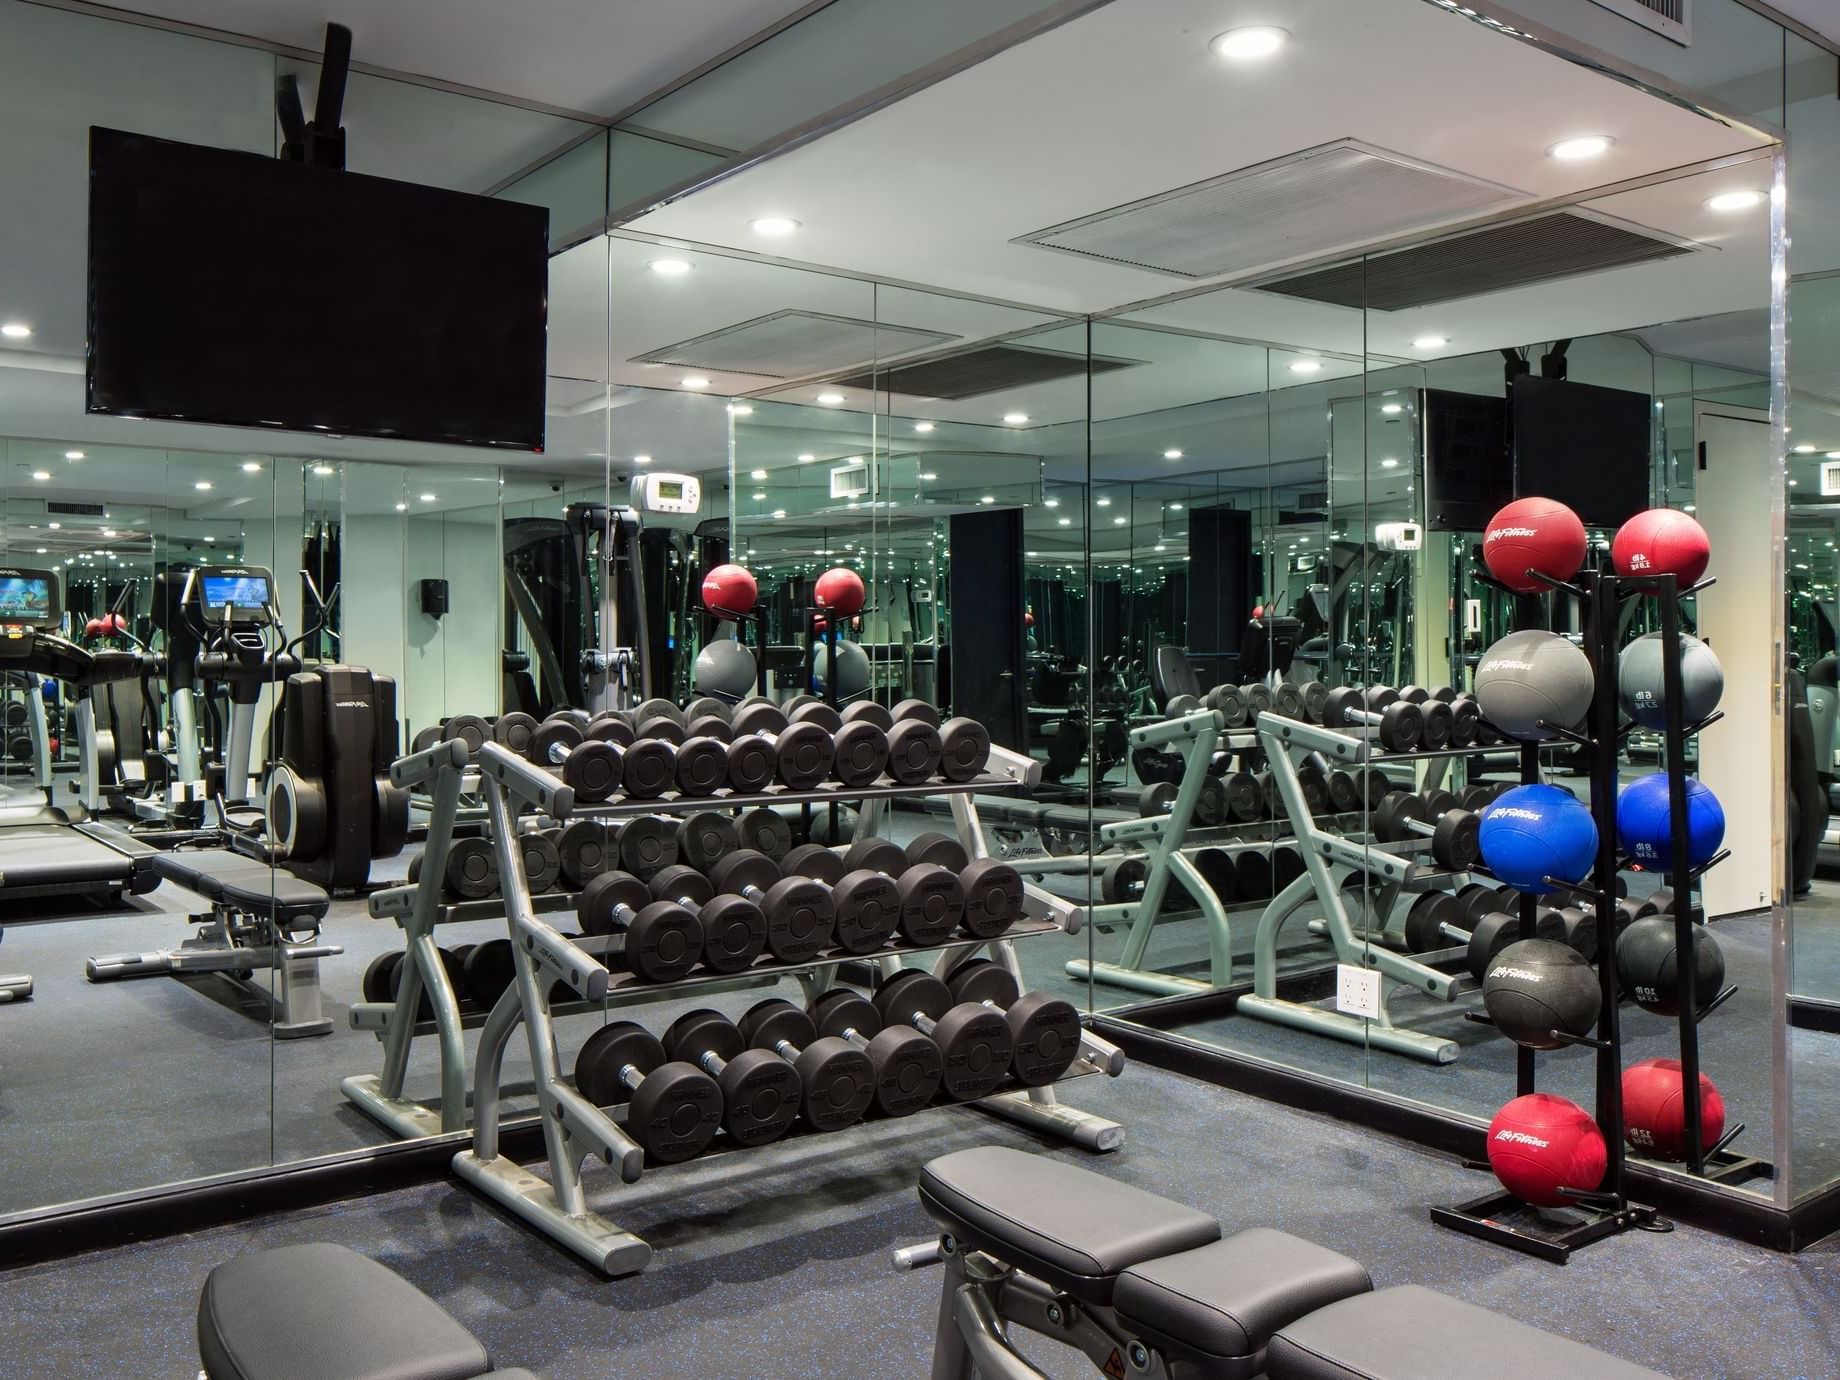 Weights & equipment in the gym at The Time New York